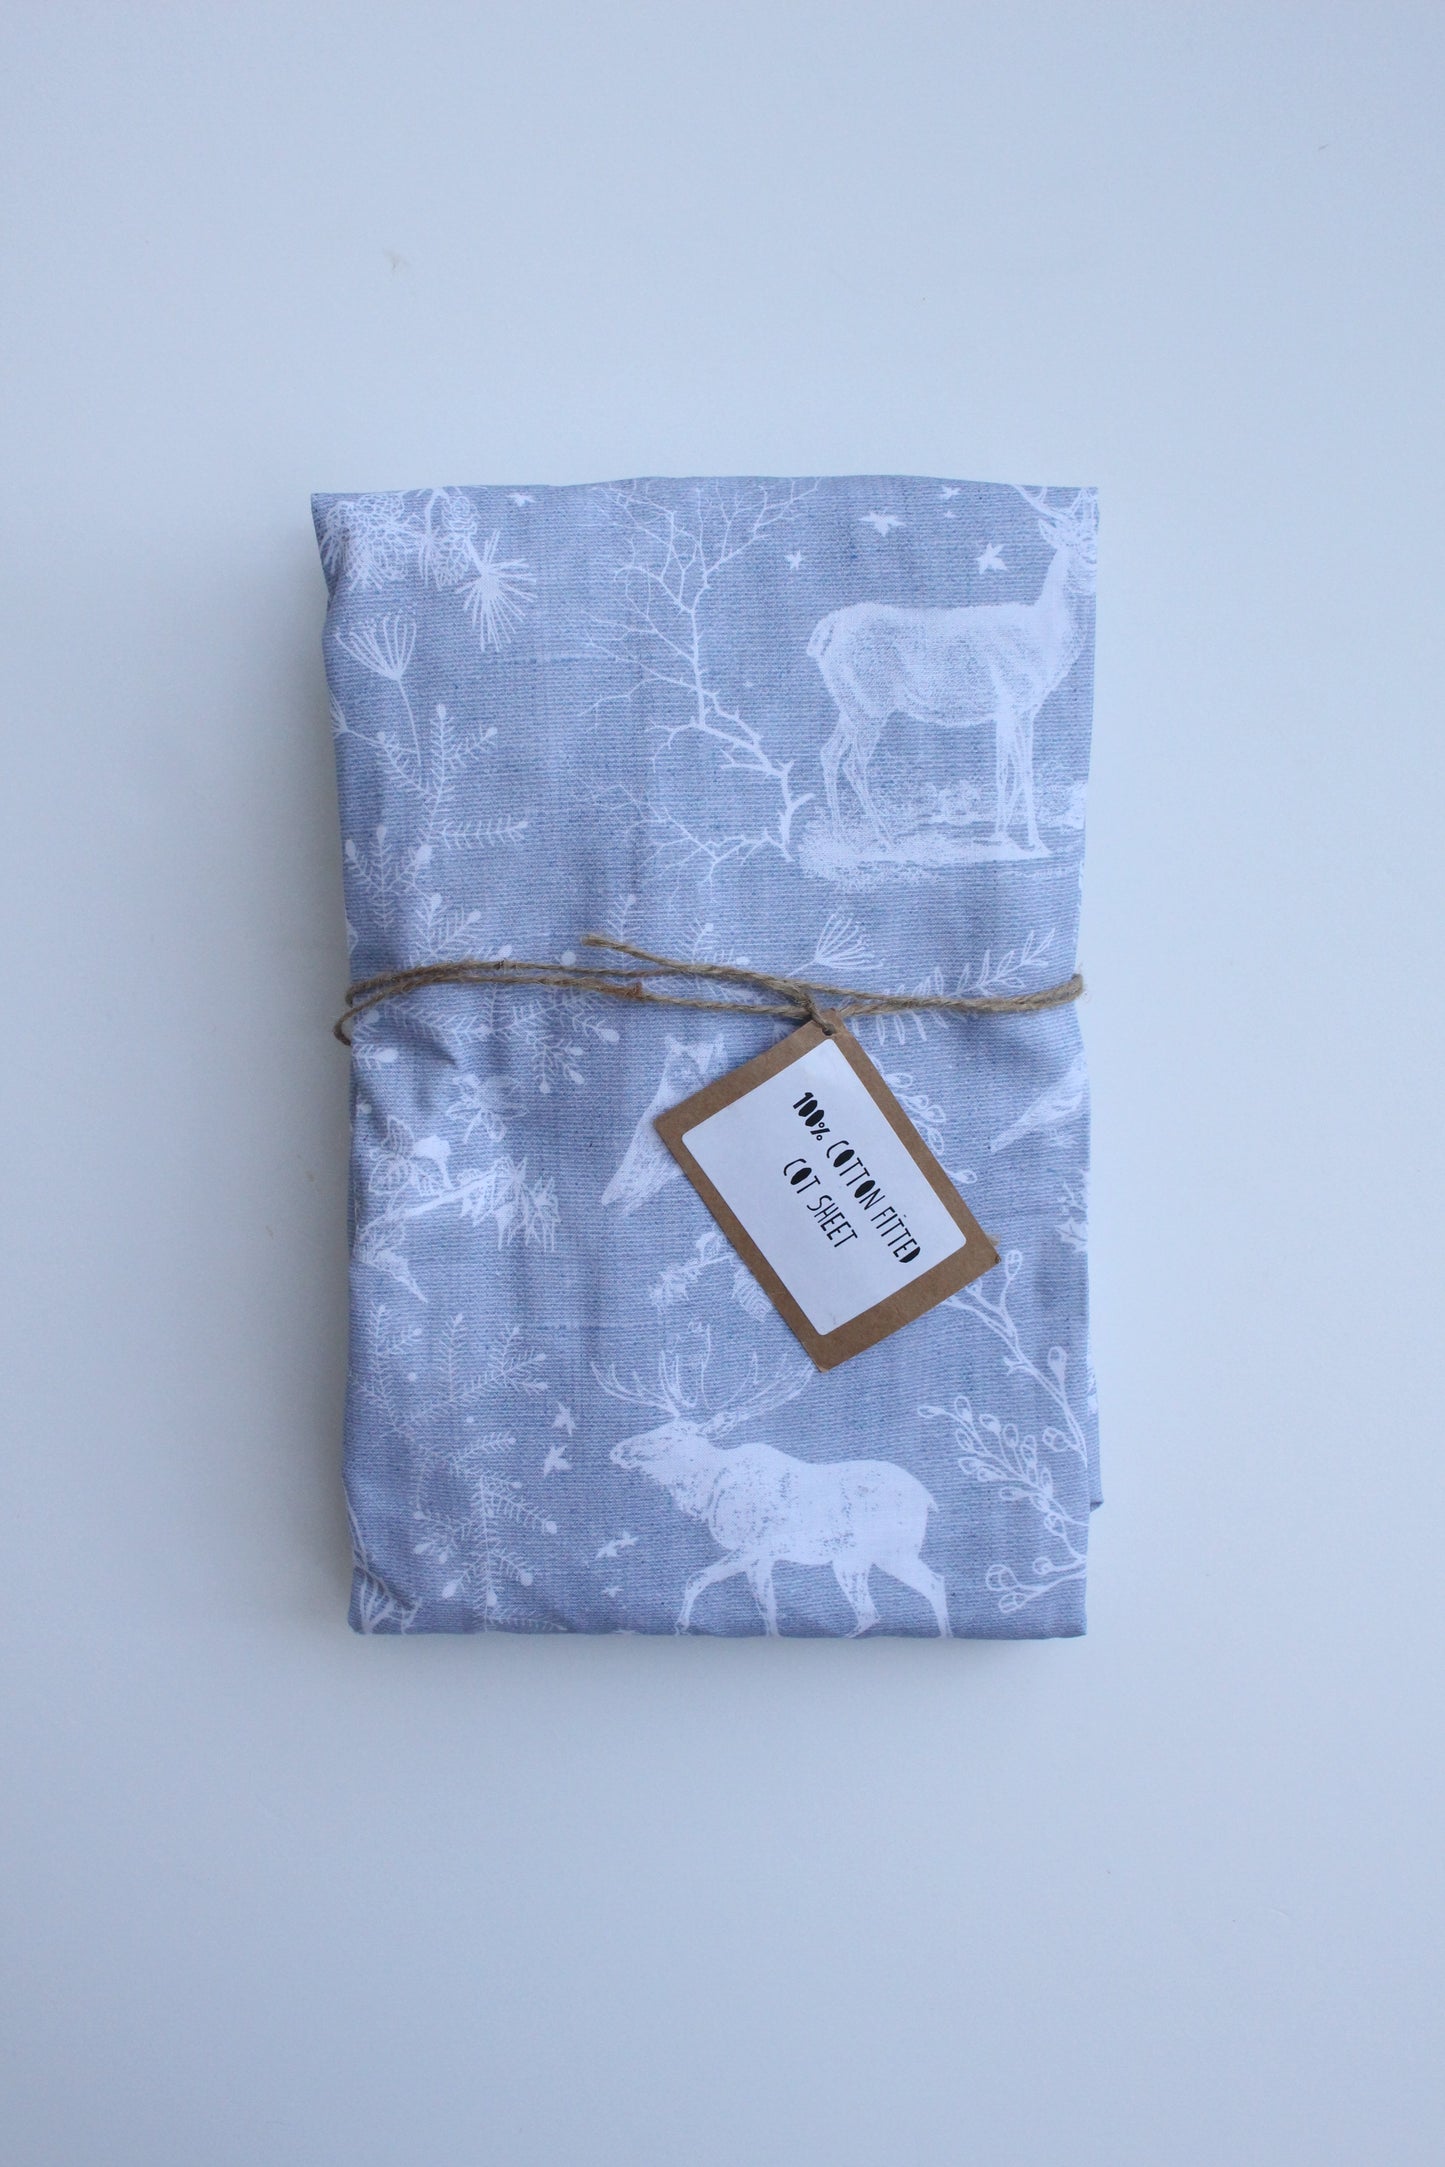 Fitted Cot Sheet - Grey Woodland